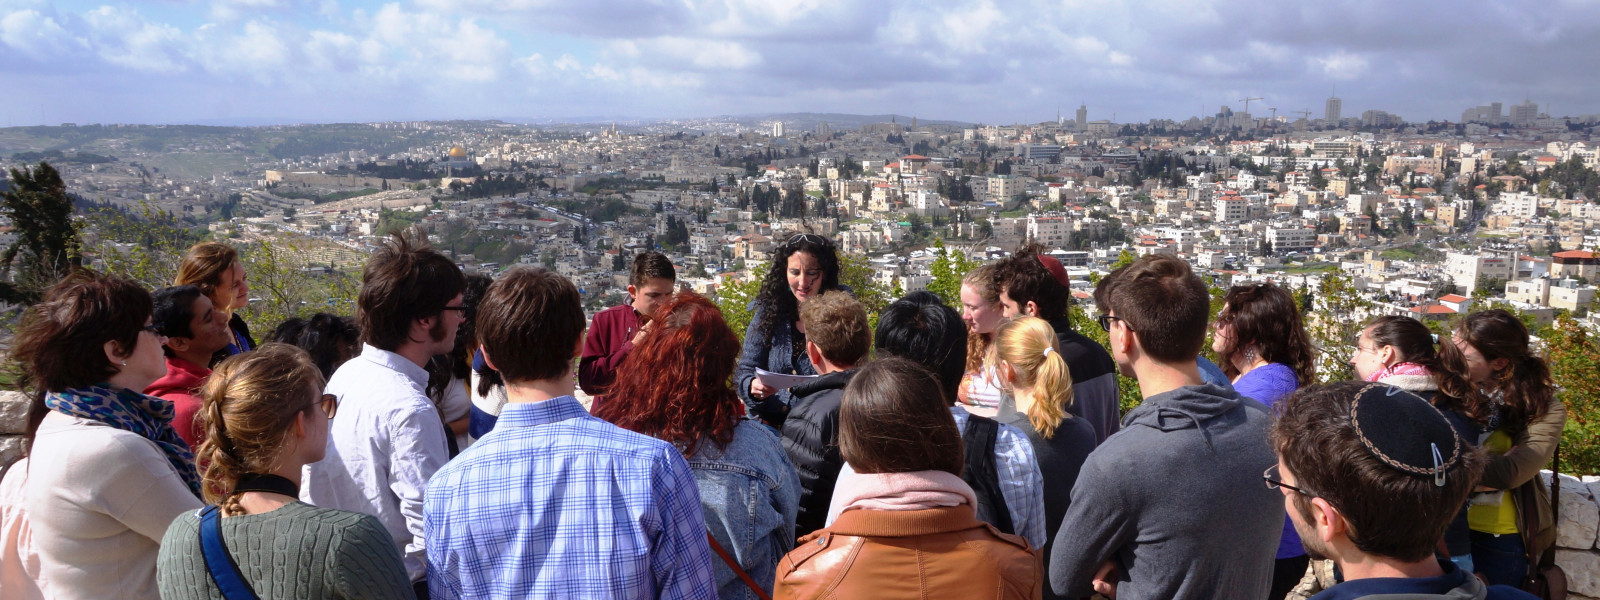 Students listen to a tour guide while looking over the city.